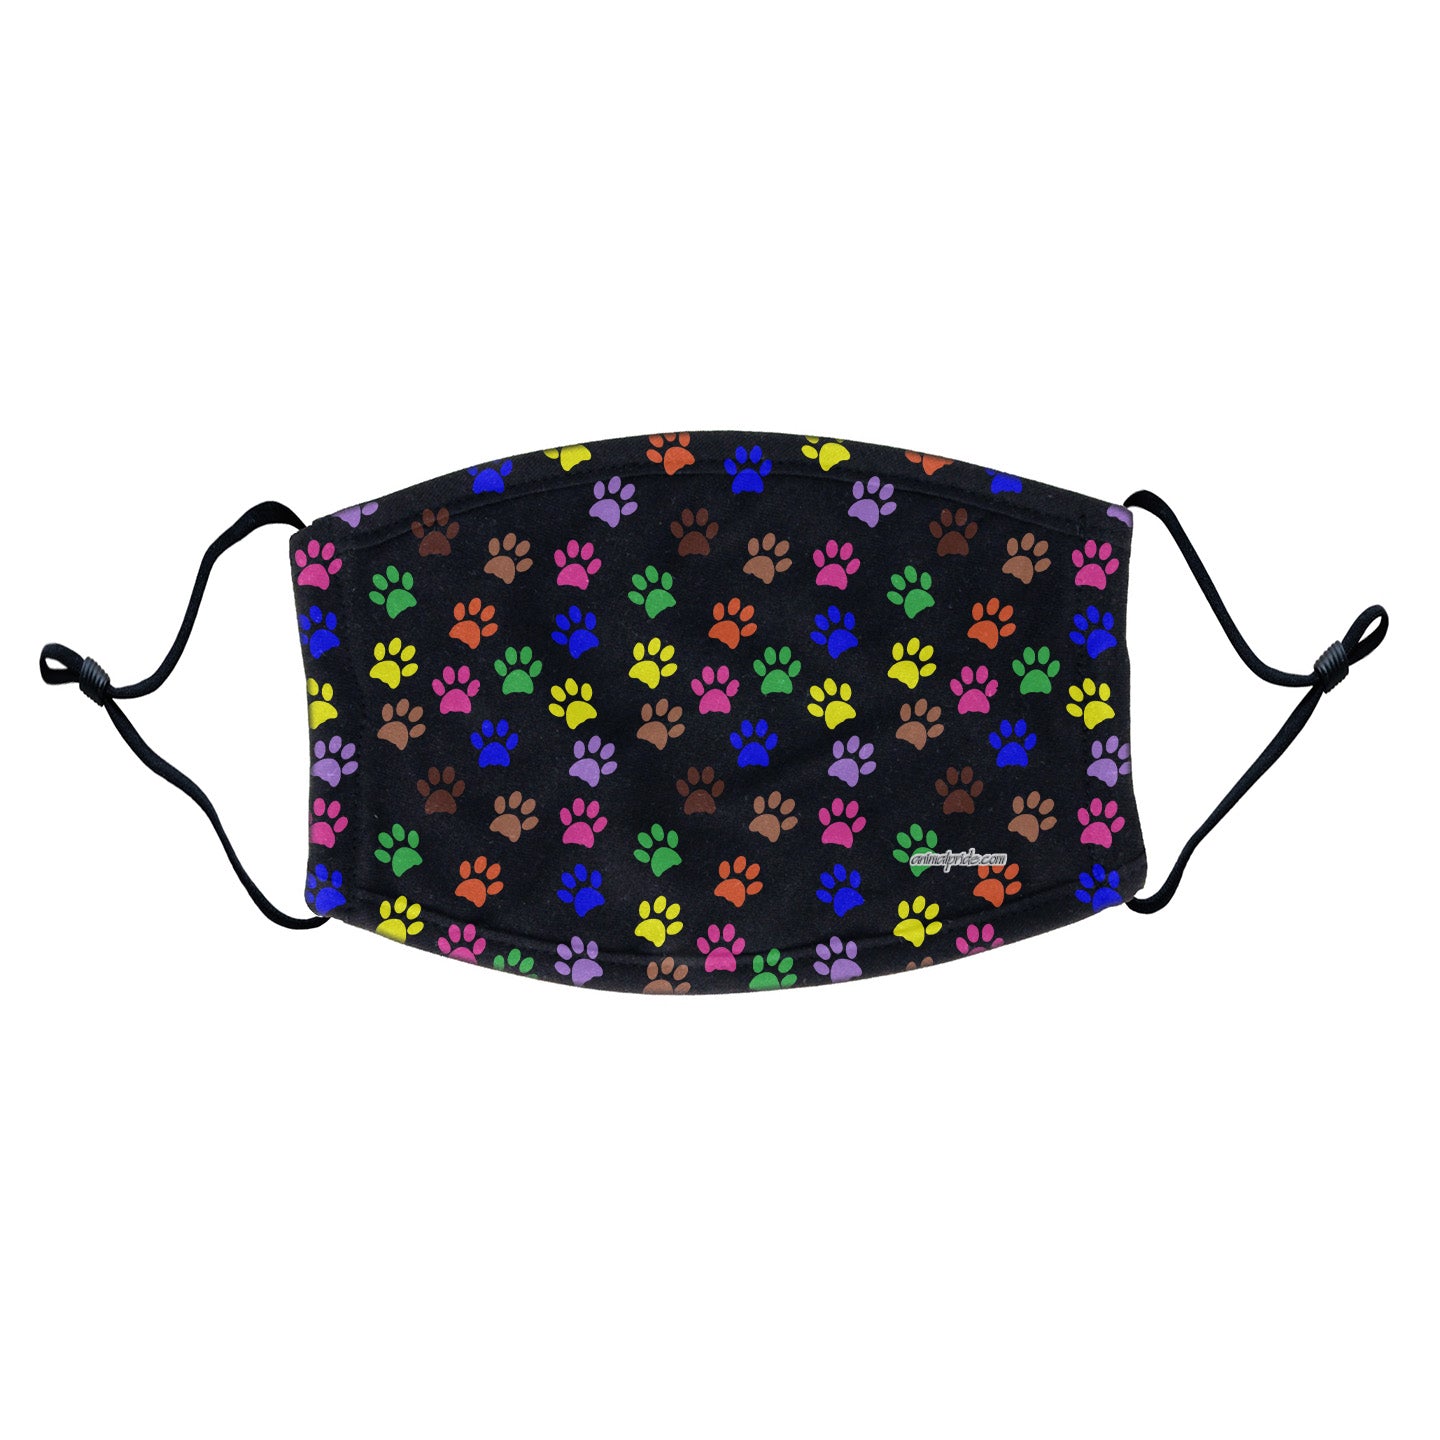 Colorful Paw Prints Face Mask - Adjustable Ear Loops, Reusable & Washable, Cloth - Animal Pride